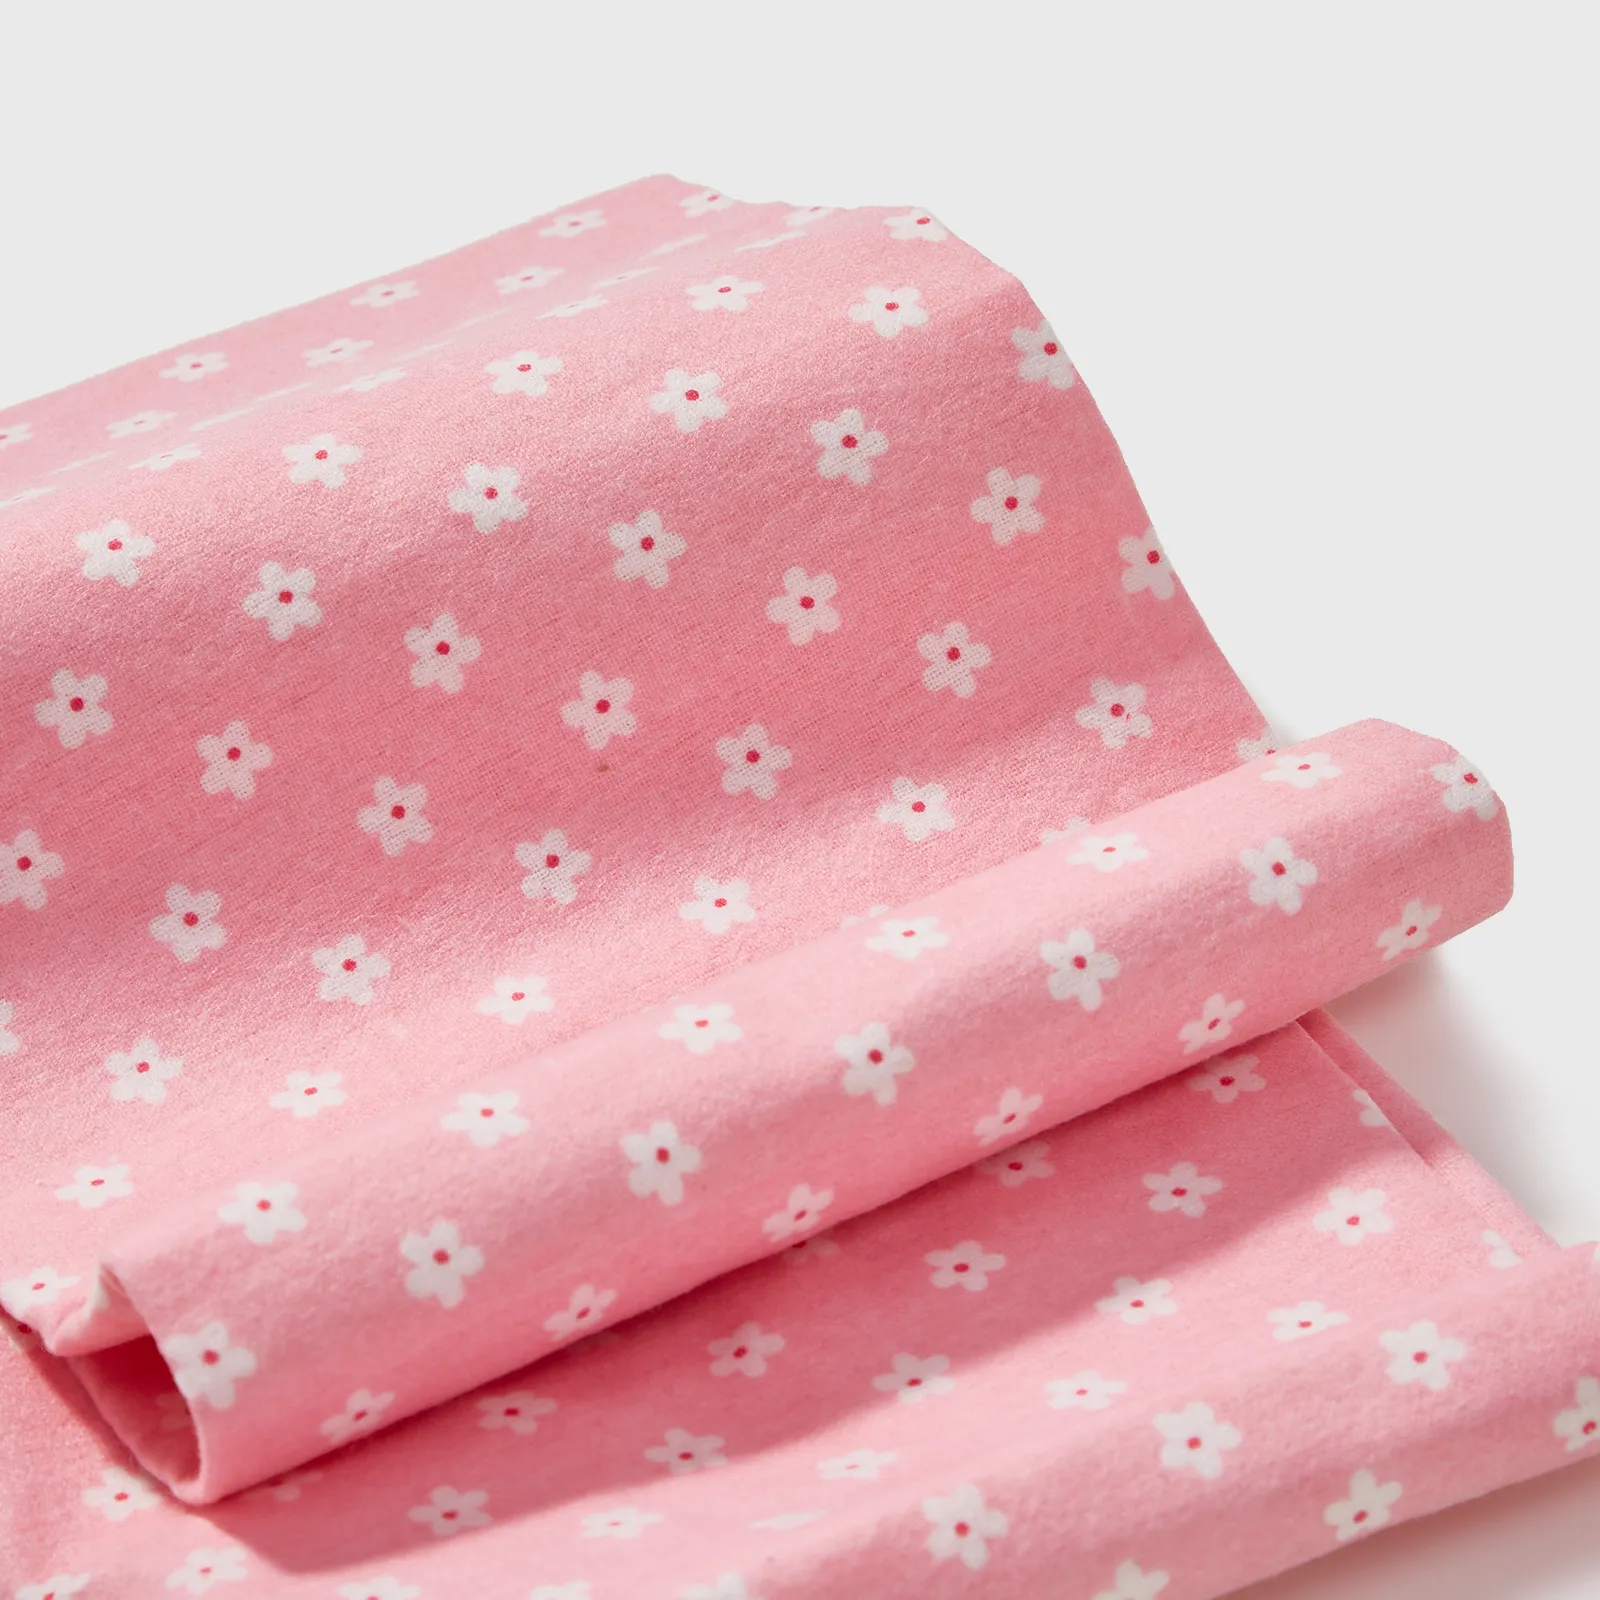 Set Of 4 Baby Flannel Blankets - Soft And Cozy Infant Swaddle Blankets